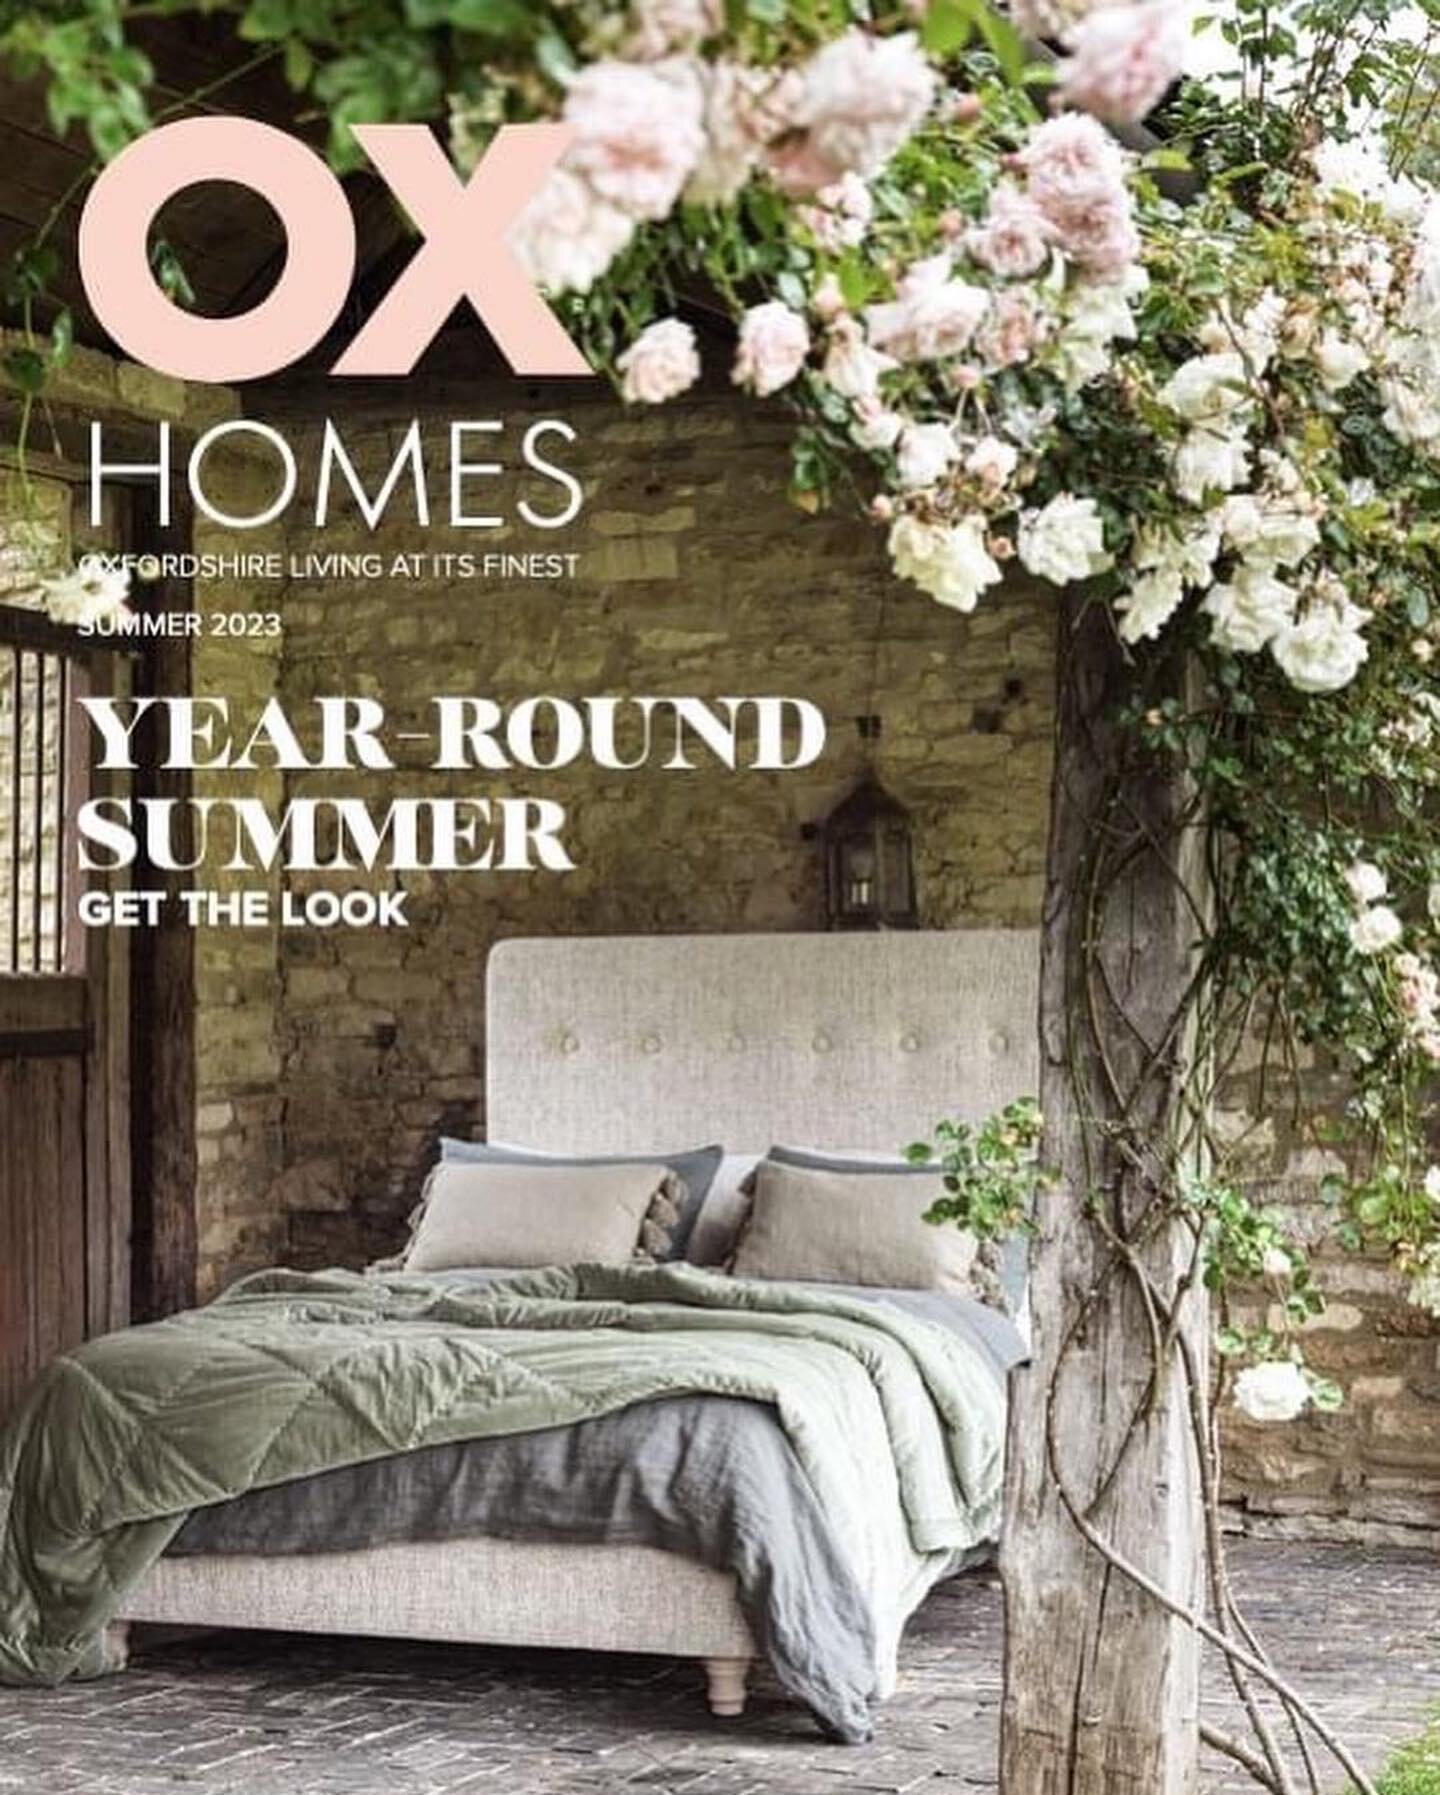 I'm pleased to share that my tips on creating a Climate-Resilient Garden are featured in the Ox Homes Summer Edition! 

With warmer wetter winters and hotter drier summers, discover how to transform your garden into a climate-resilient space that pro